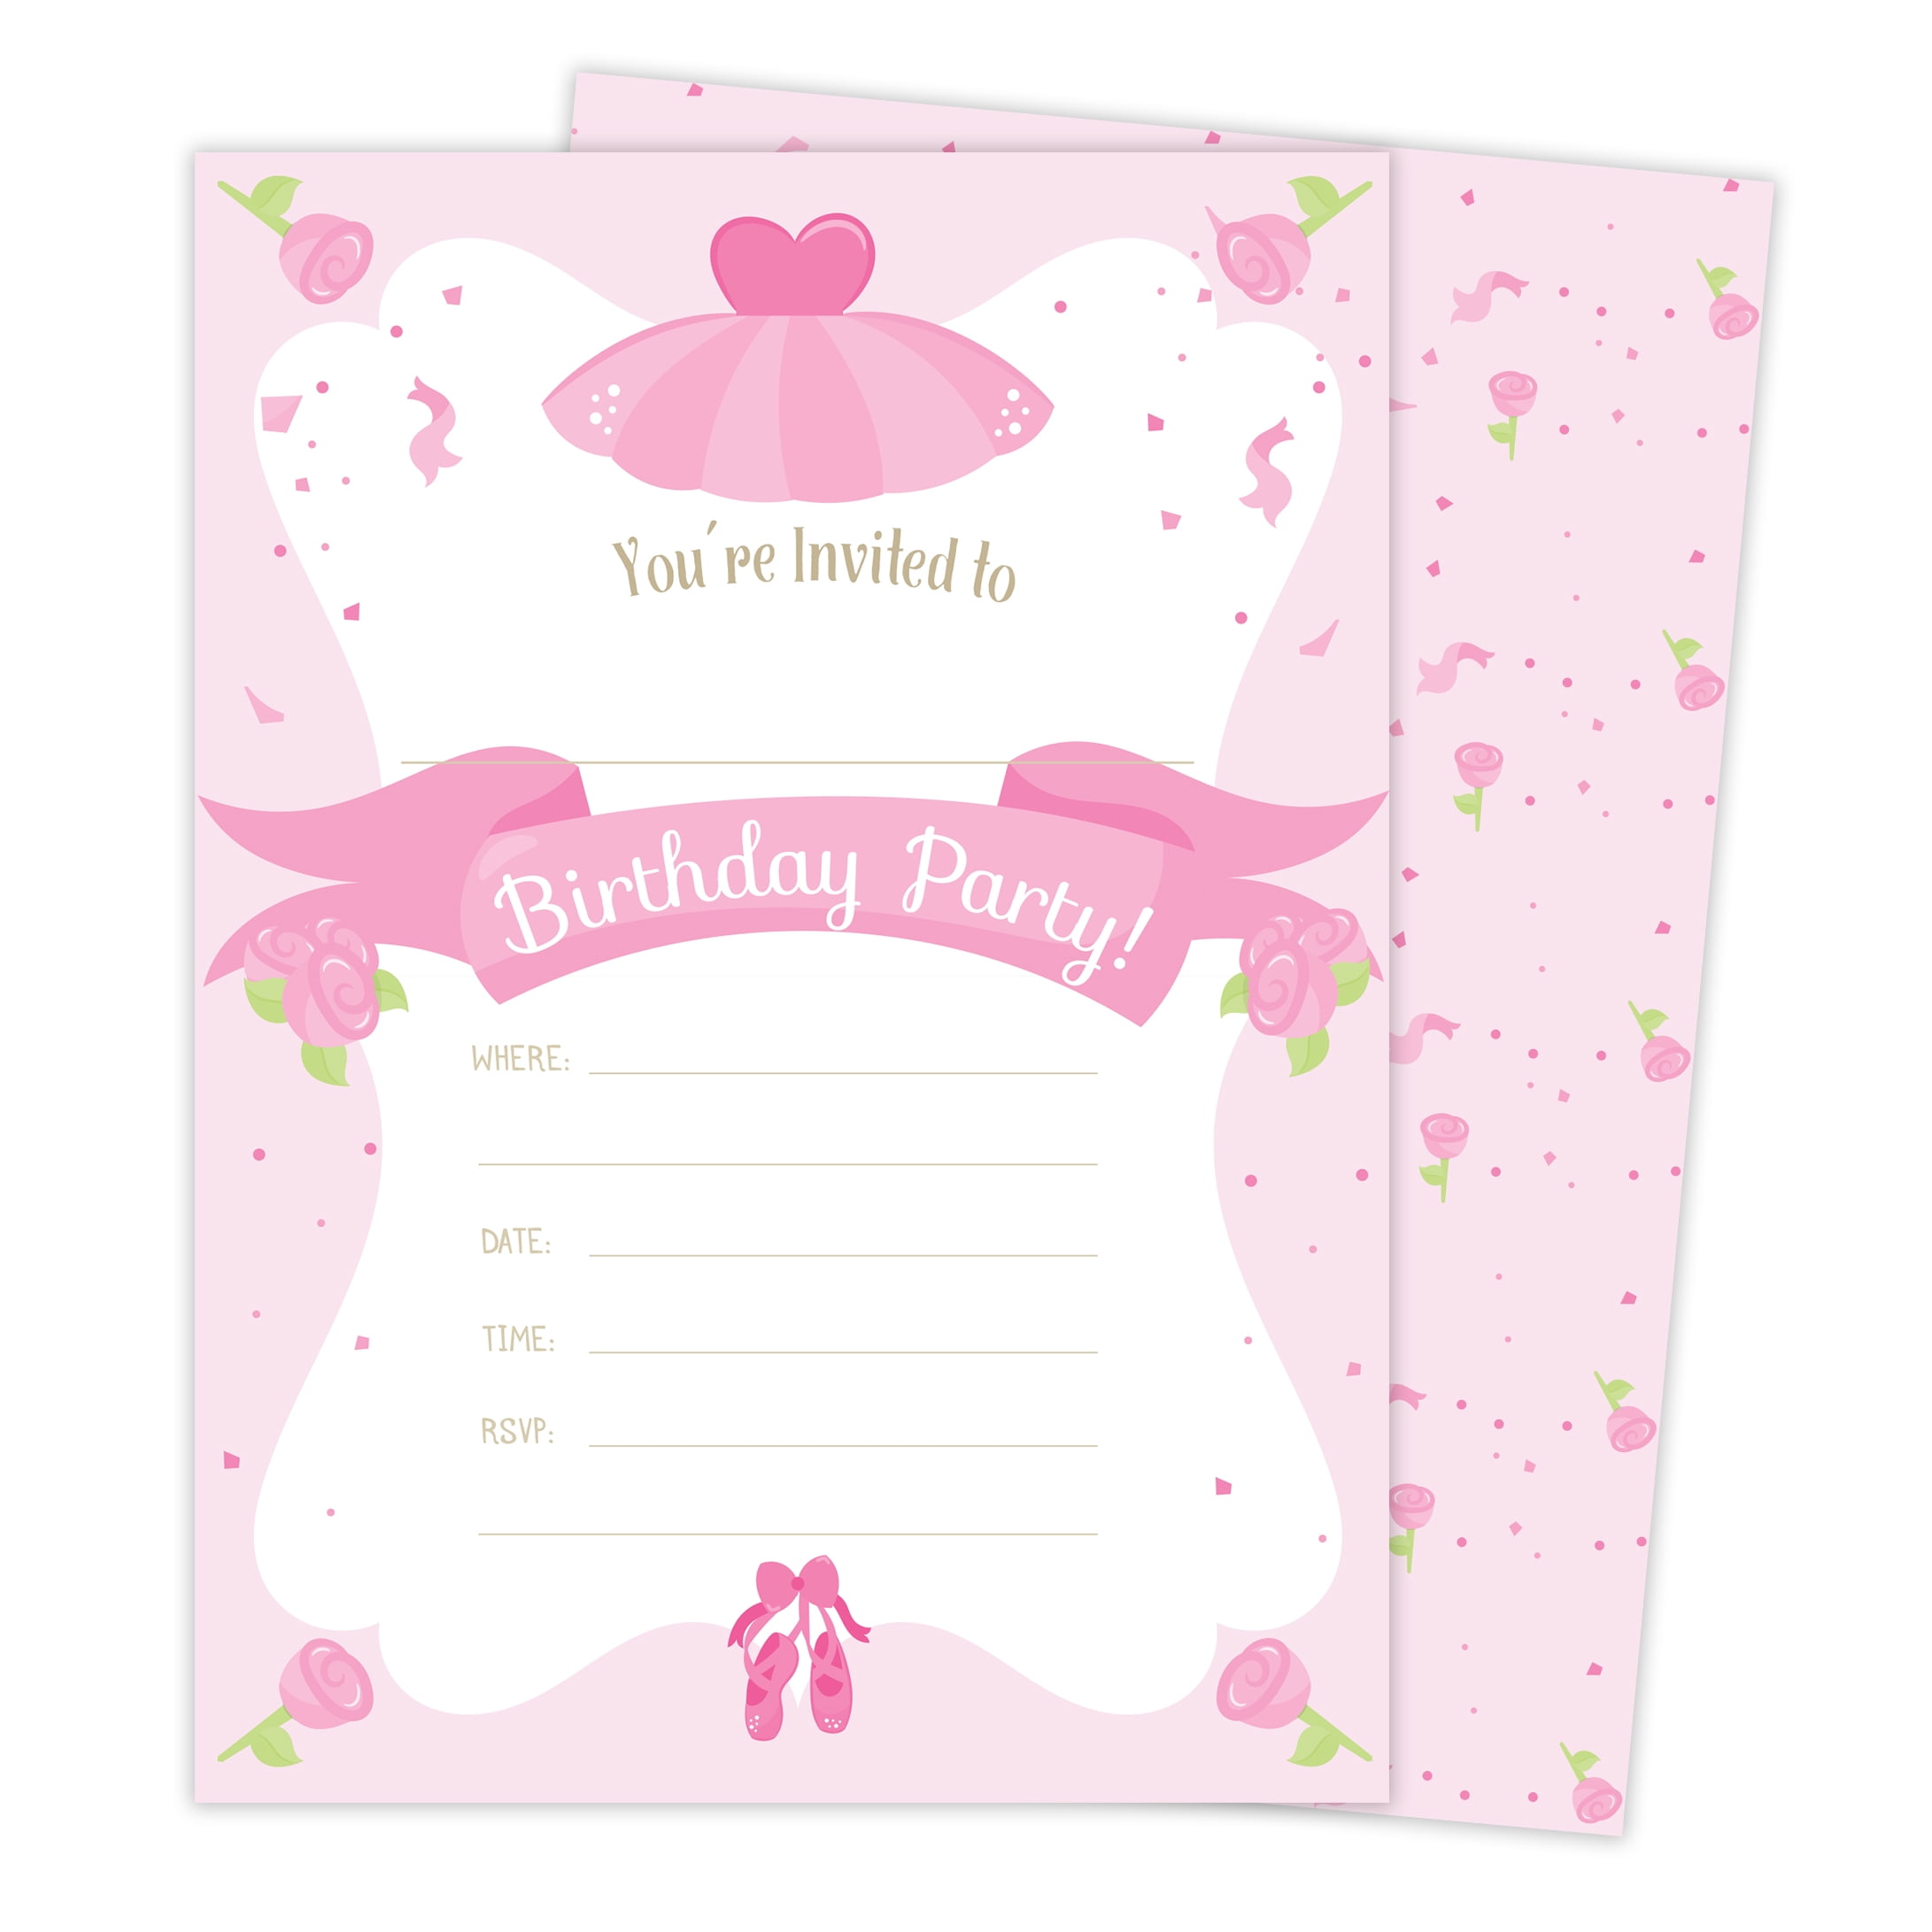 Ballerina Style 2 Happy Birthday Invitations Invite Cards (25 Count) with Envelopes &amp; Seal Stickers Boys Girls Kids Party